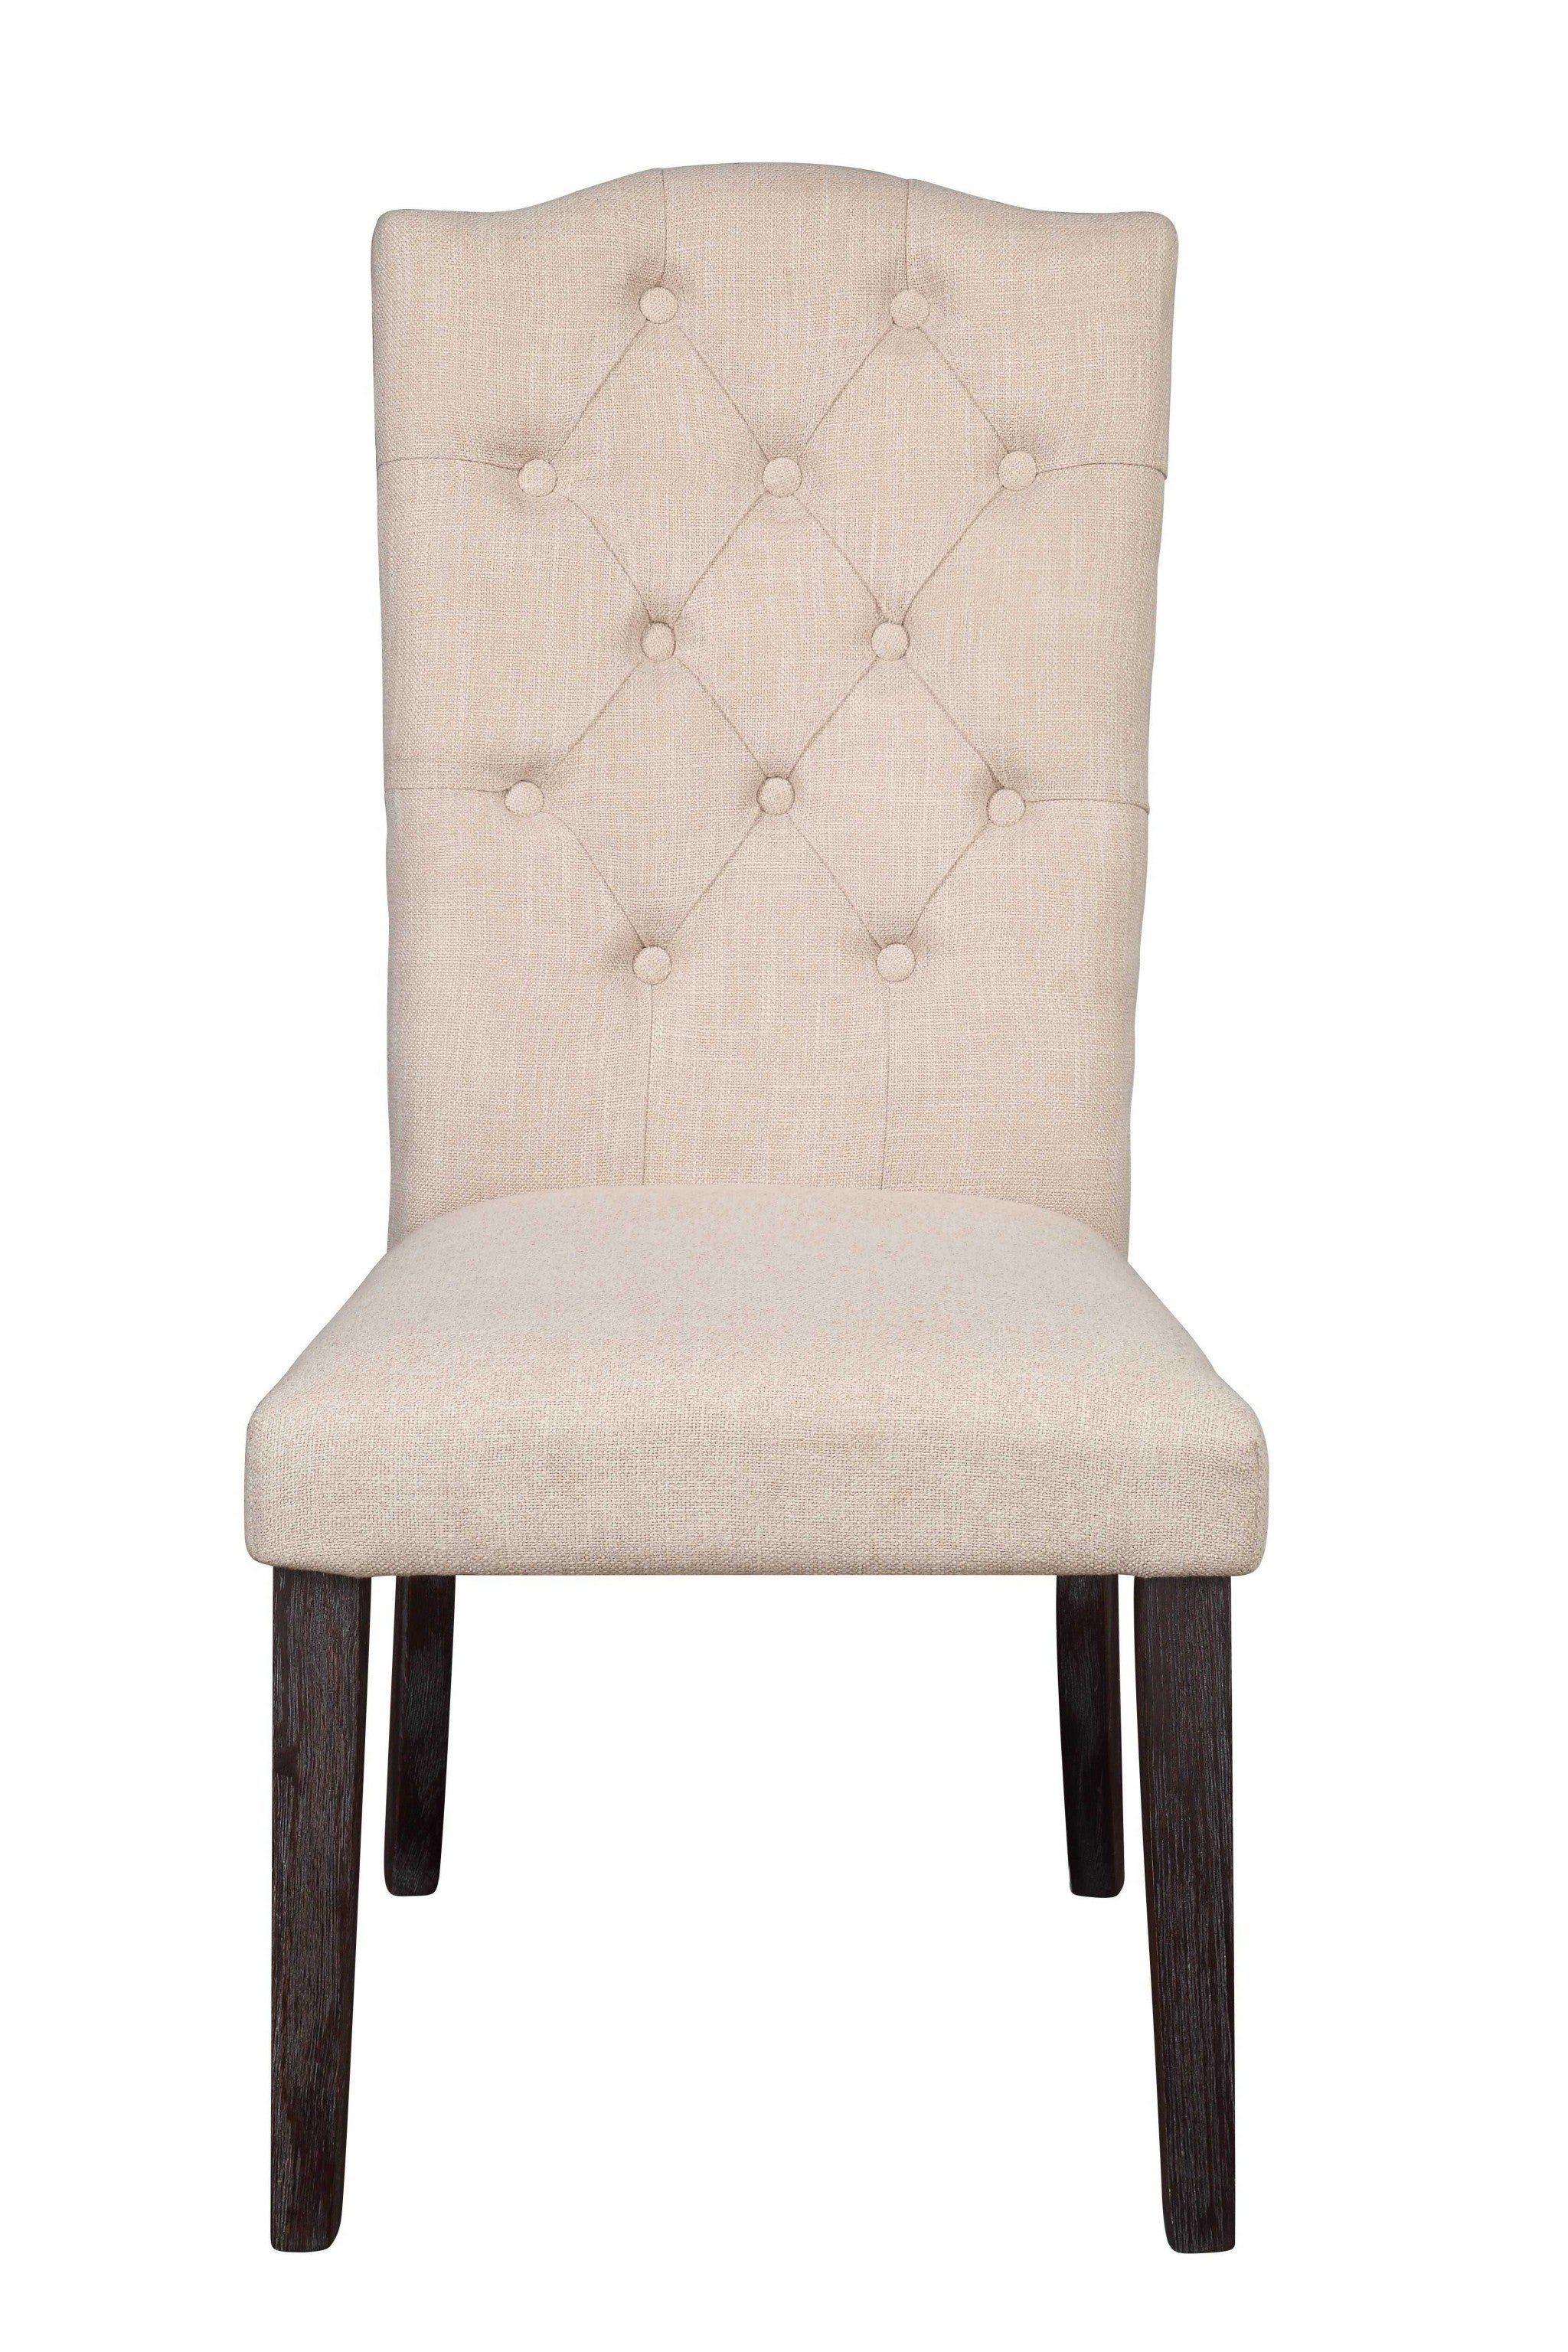 Set of Two Tufted Beige and Espresso Upholstered Linen Dining Side Chairs